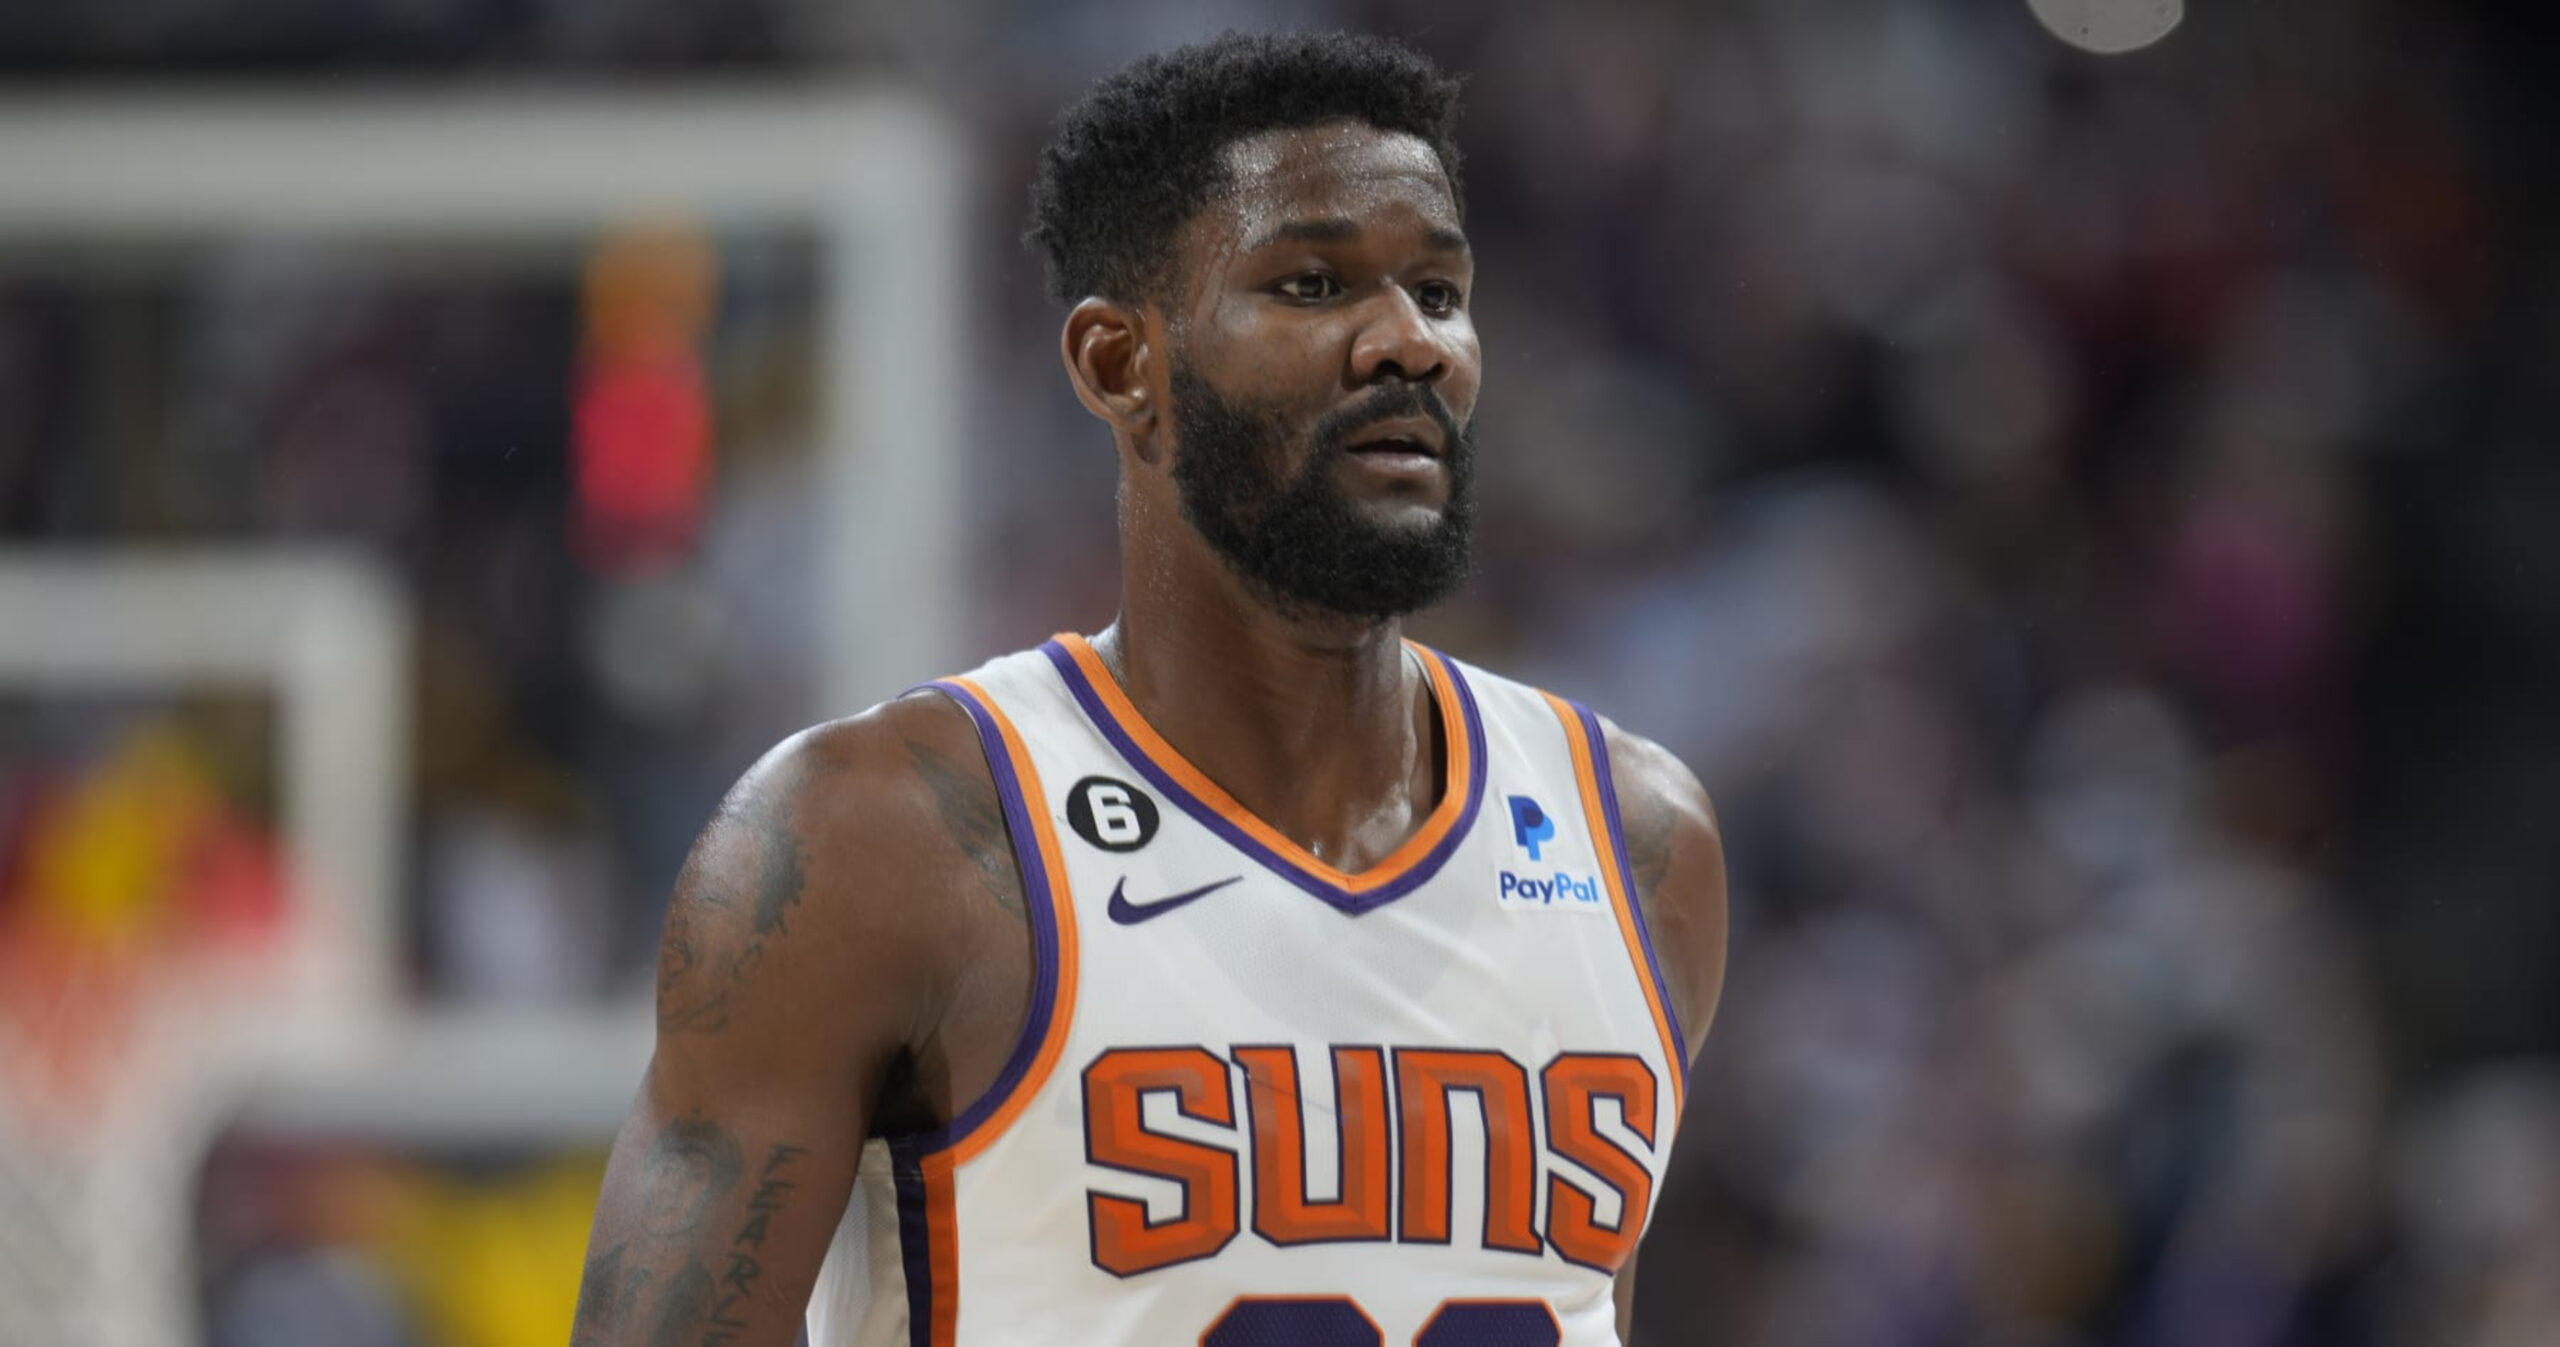 Deandre Ayton, Suns' Deandre Ayton Trade to The Clippers In Proposal